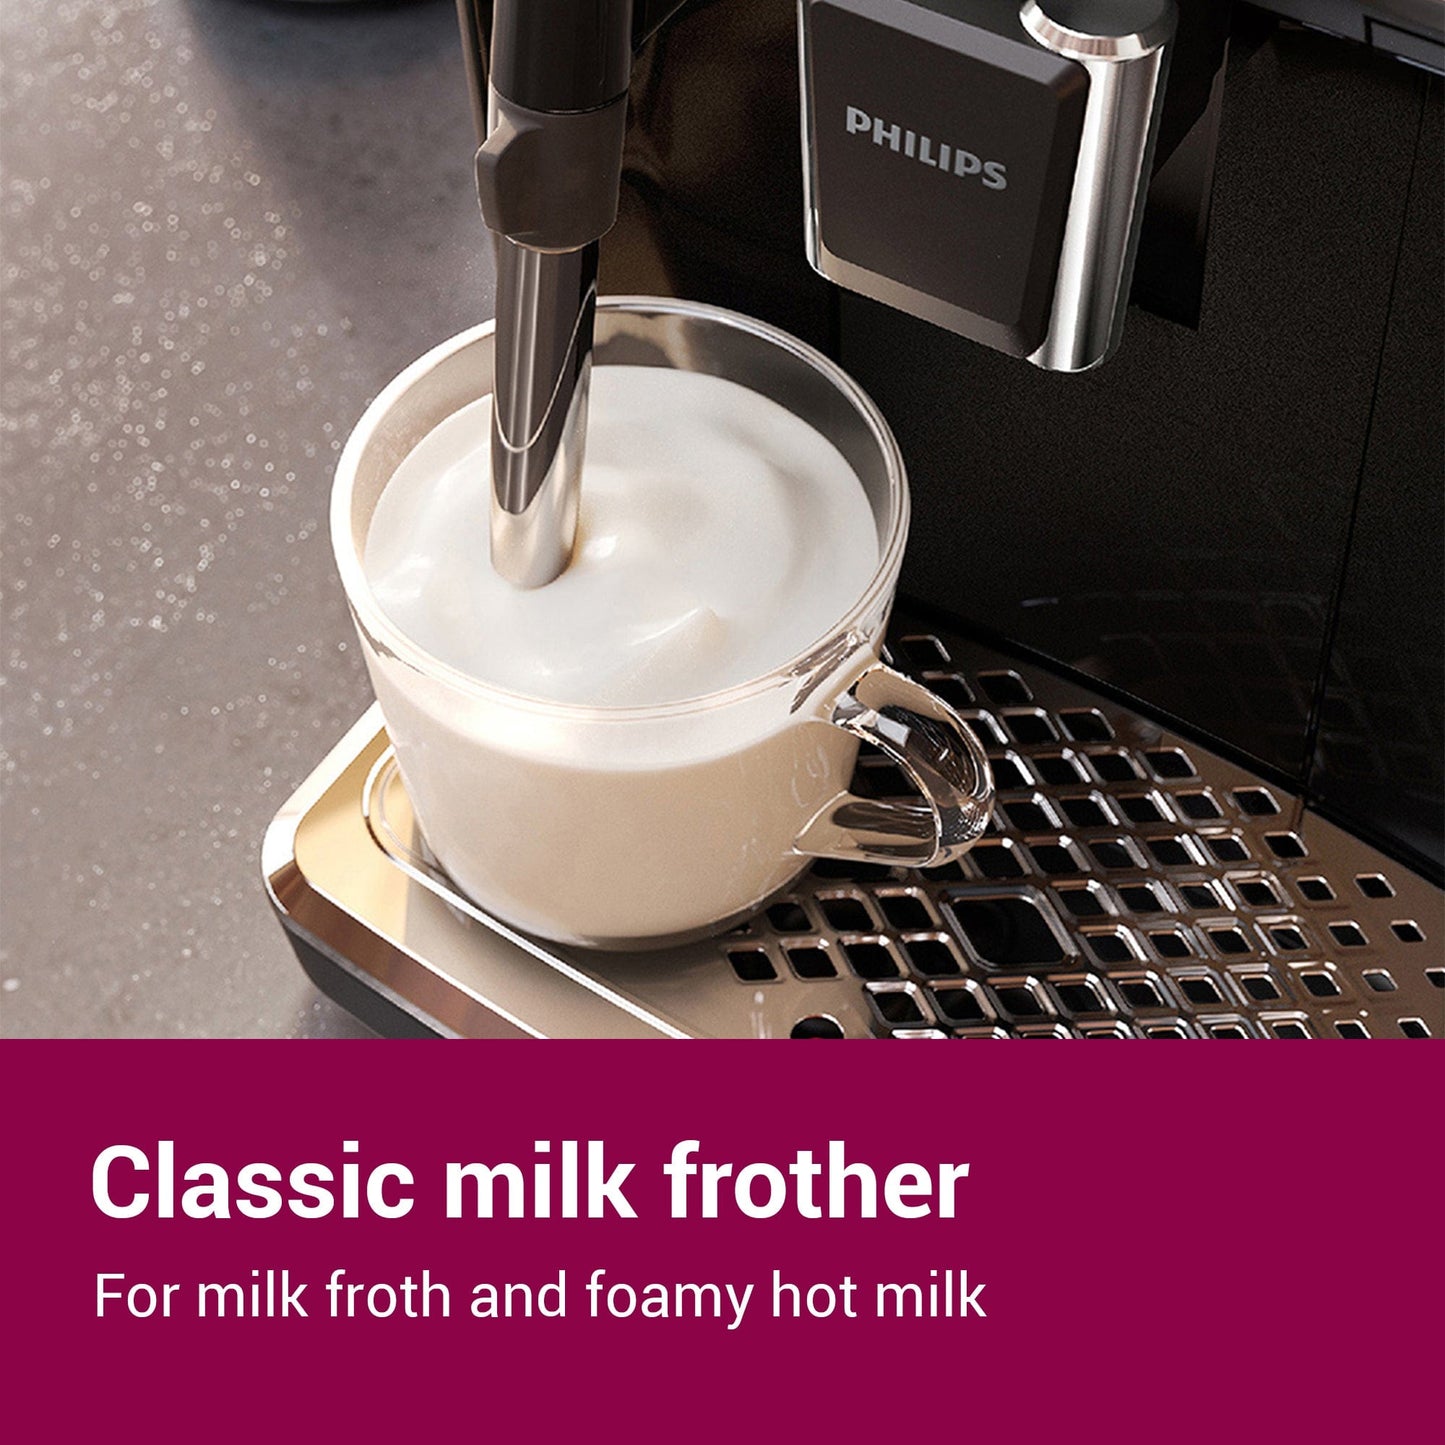 Somethings Brewing Store Philips 3200 series fully automatic espresso machines – Classic Milk Frother